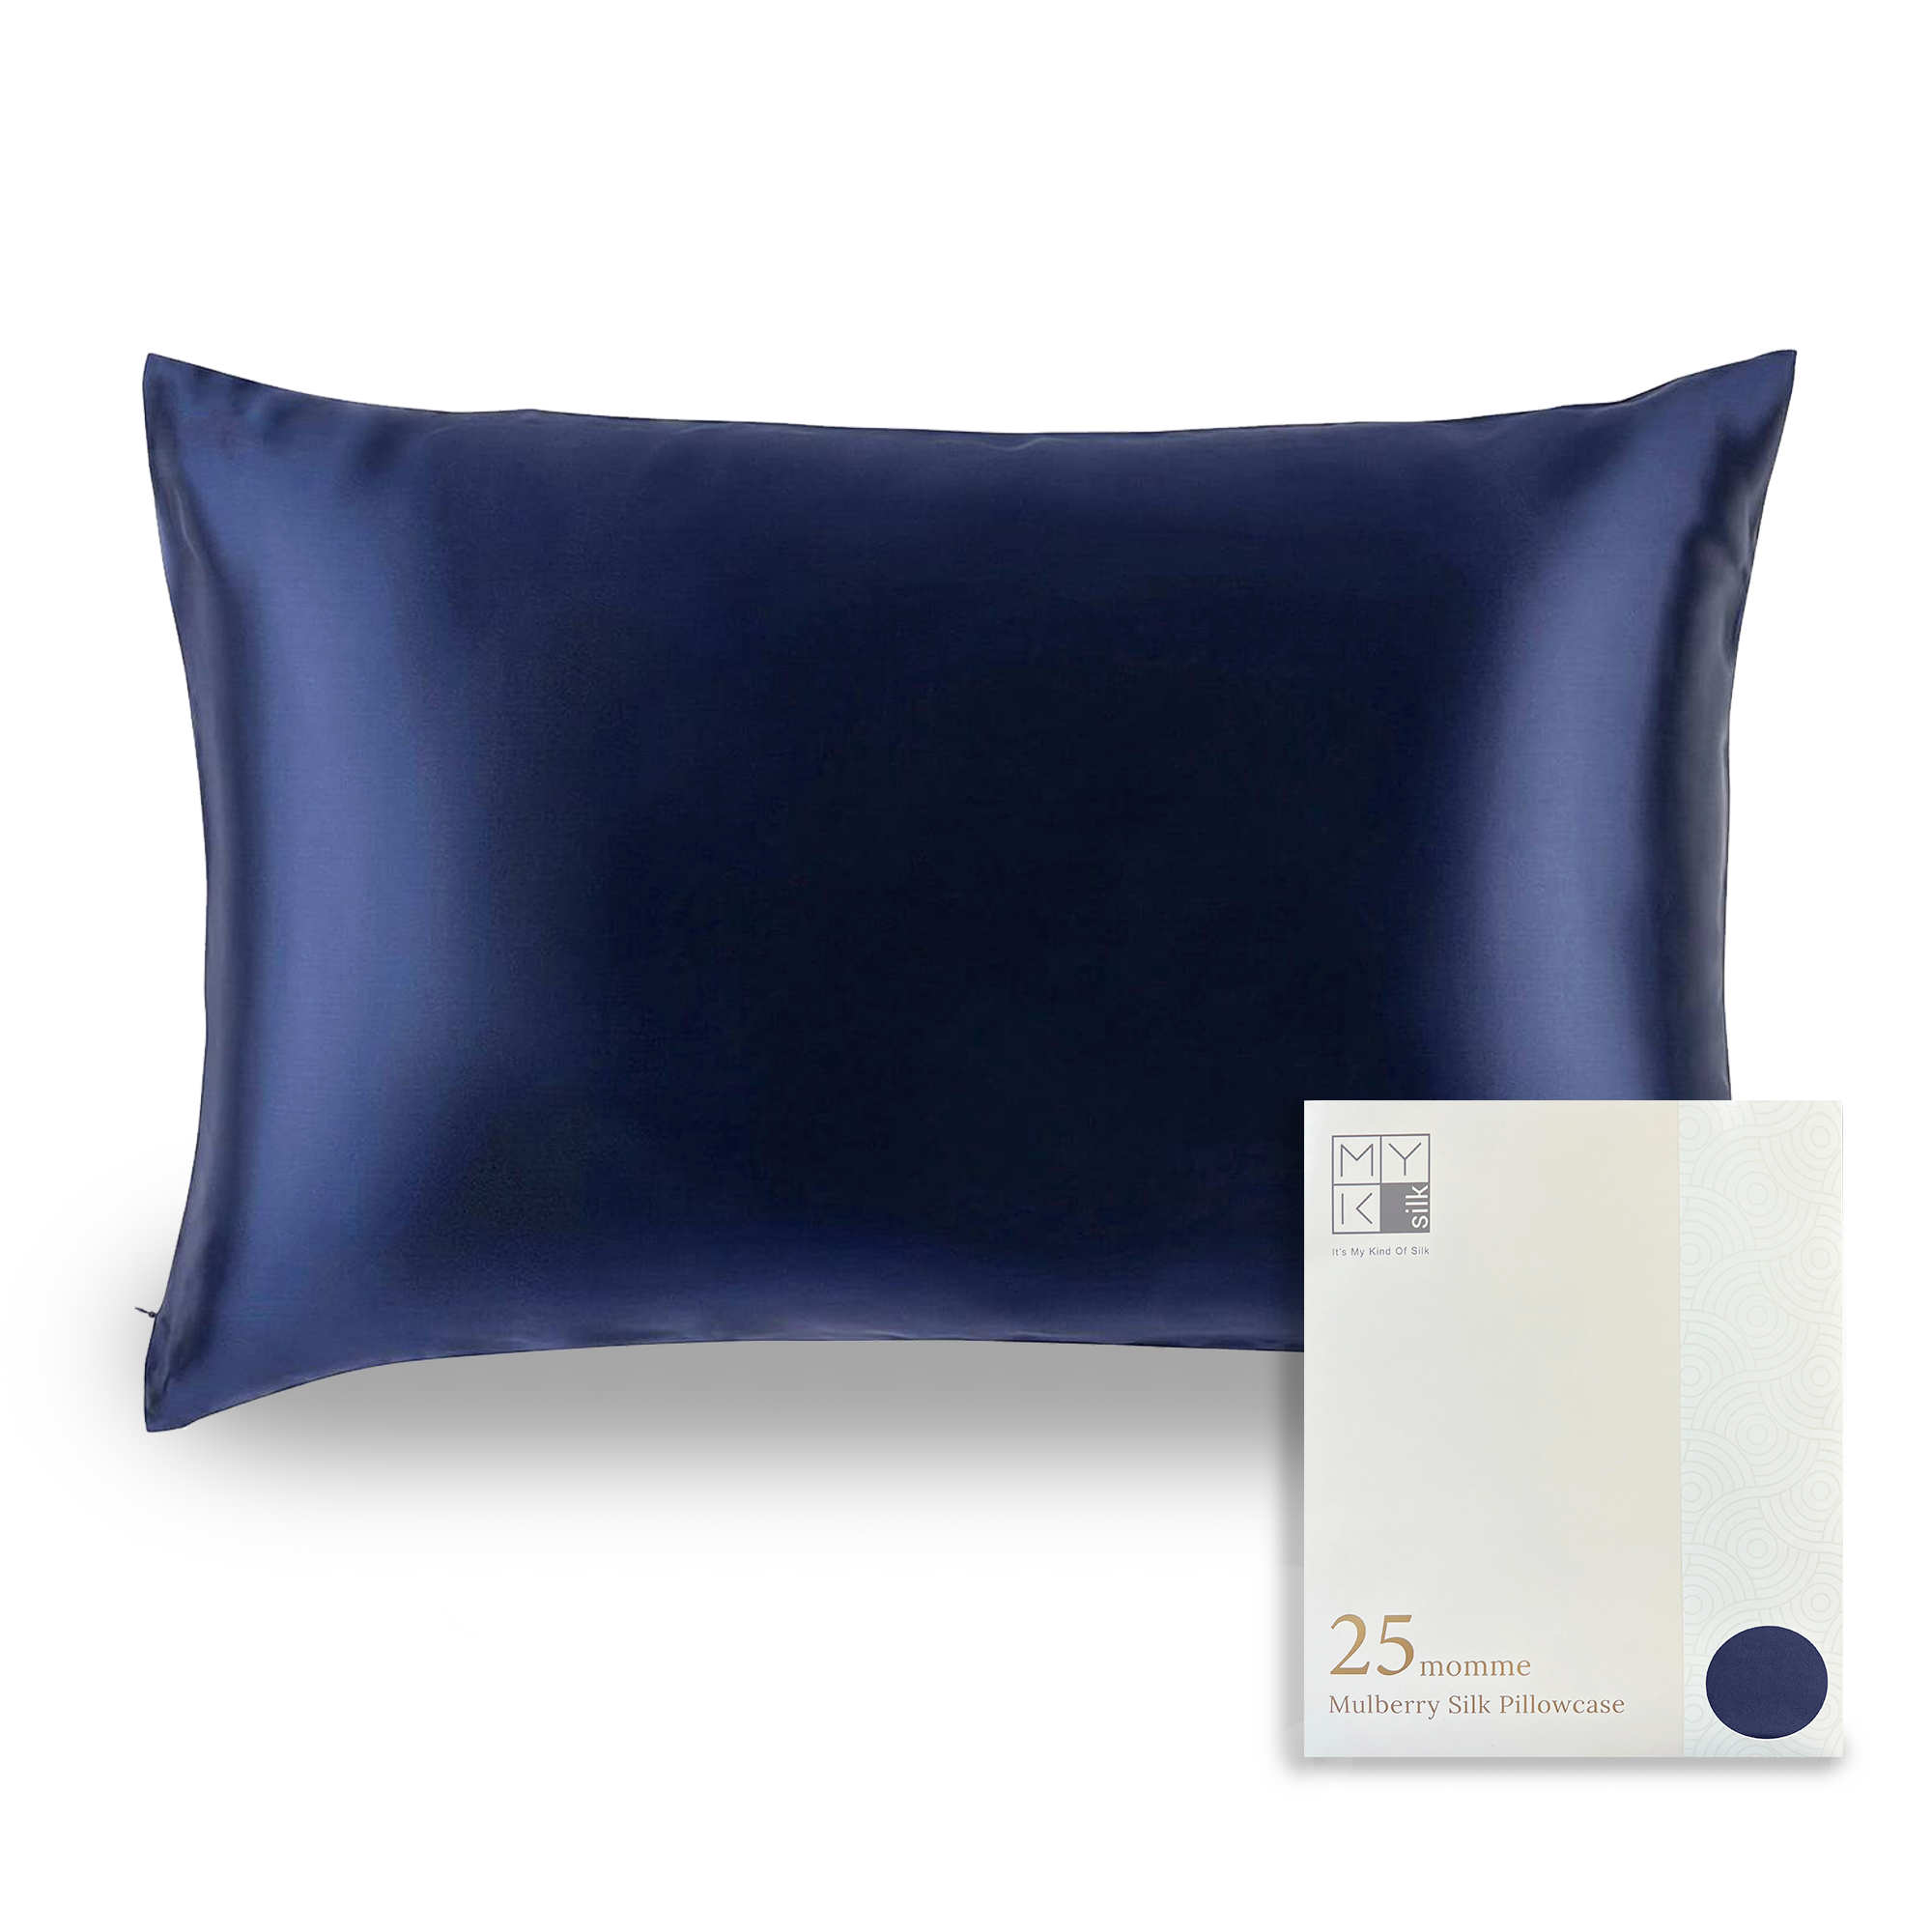 Products Luxury Mulberry Silk Pillowcase (25 momme) - MYK Silk #color_navy blue